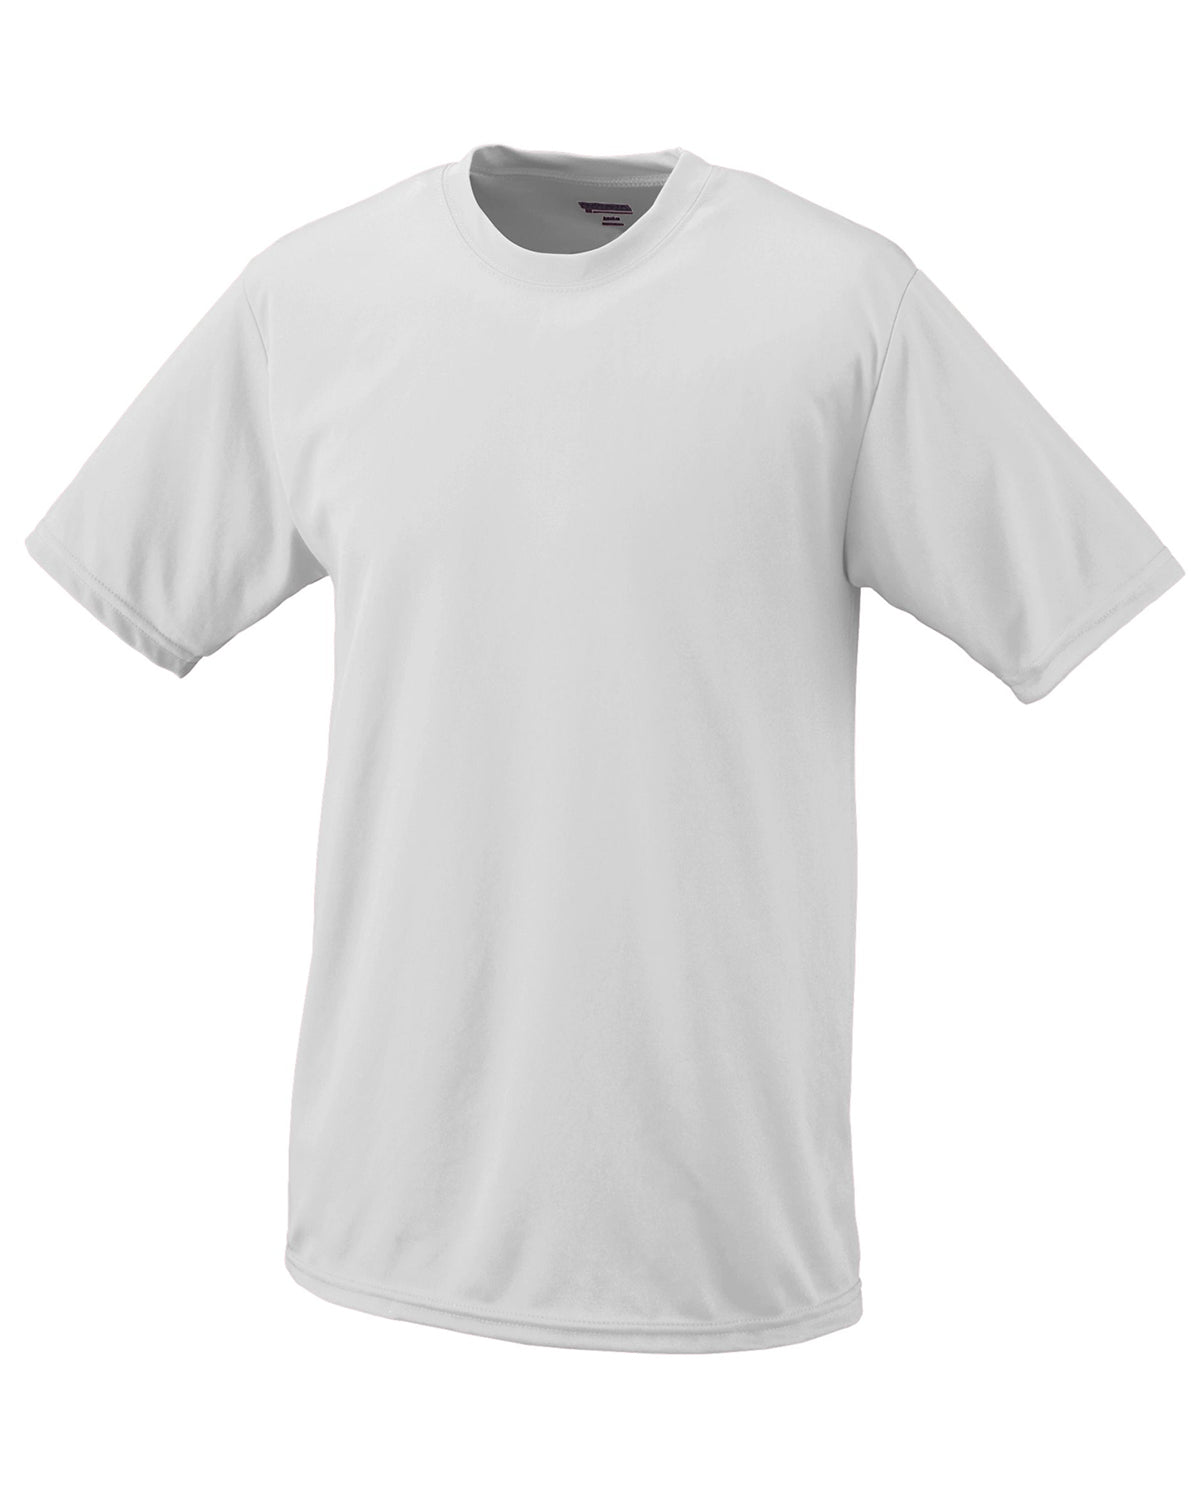 OMS Fastpitch - Performance Unisex T-Shirt